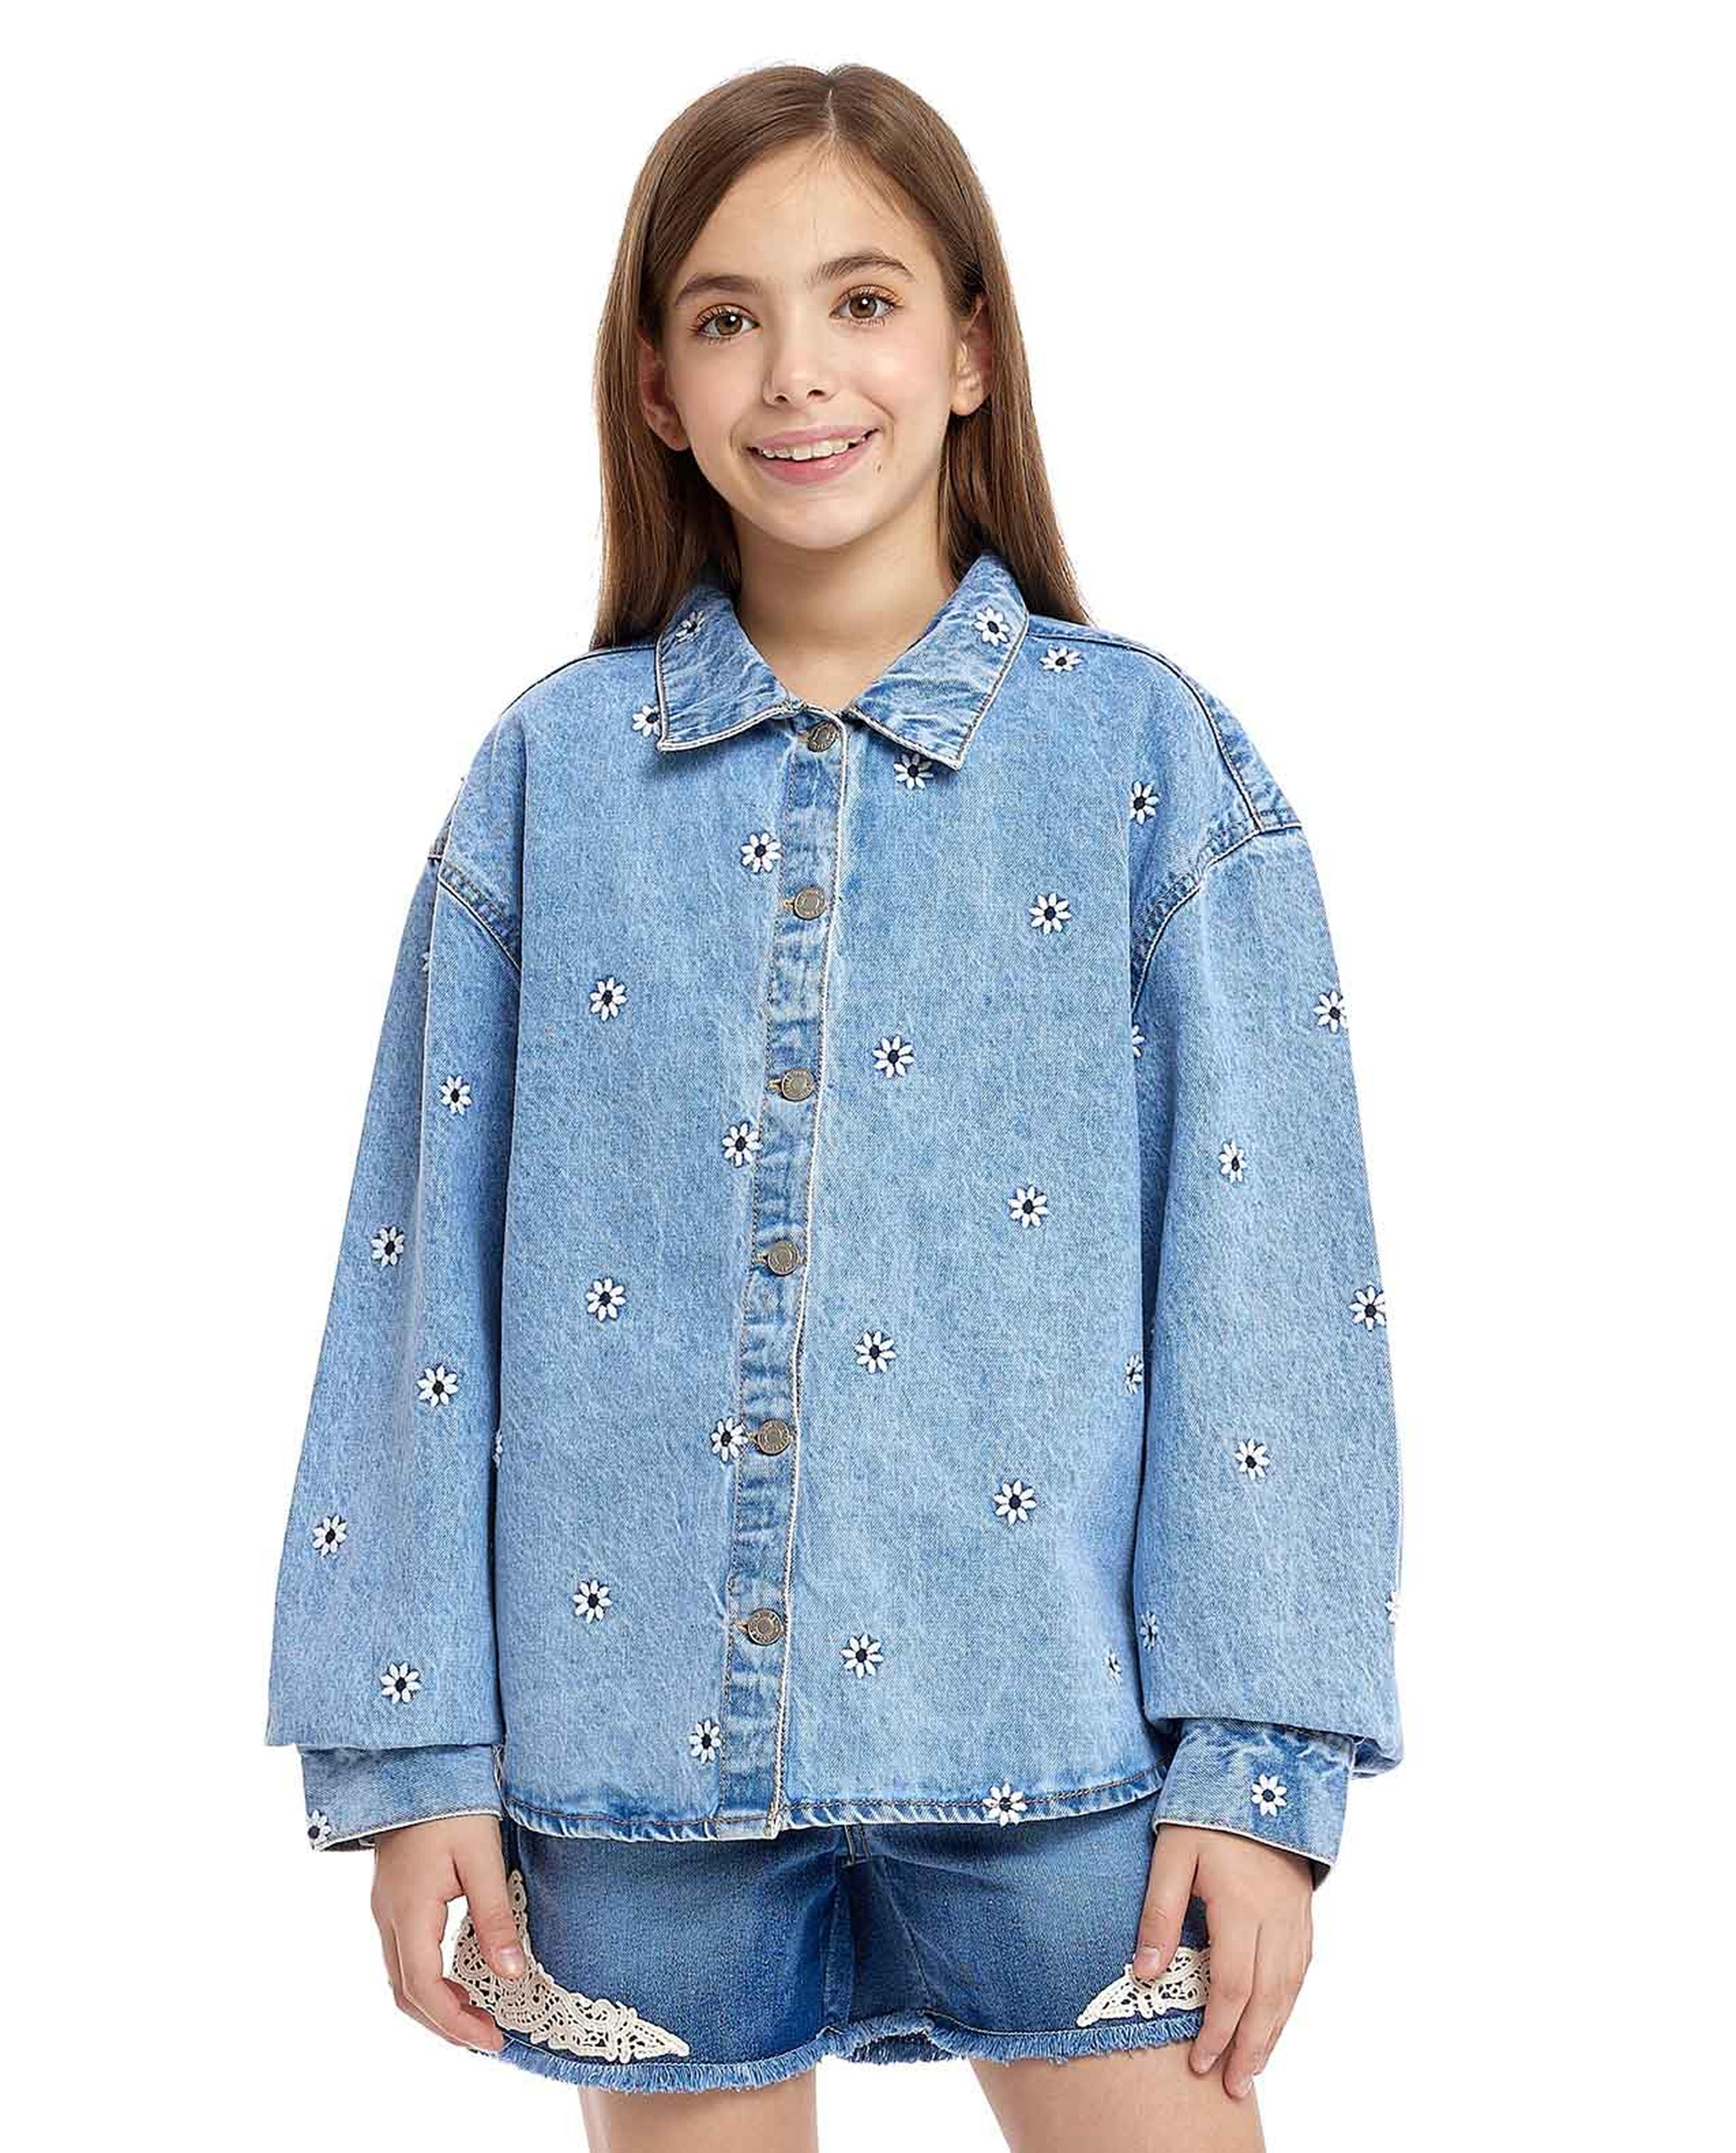 Embroidered Denim Shirt with Classic Collar and Long Sleeves